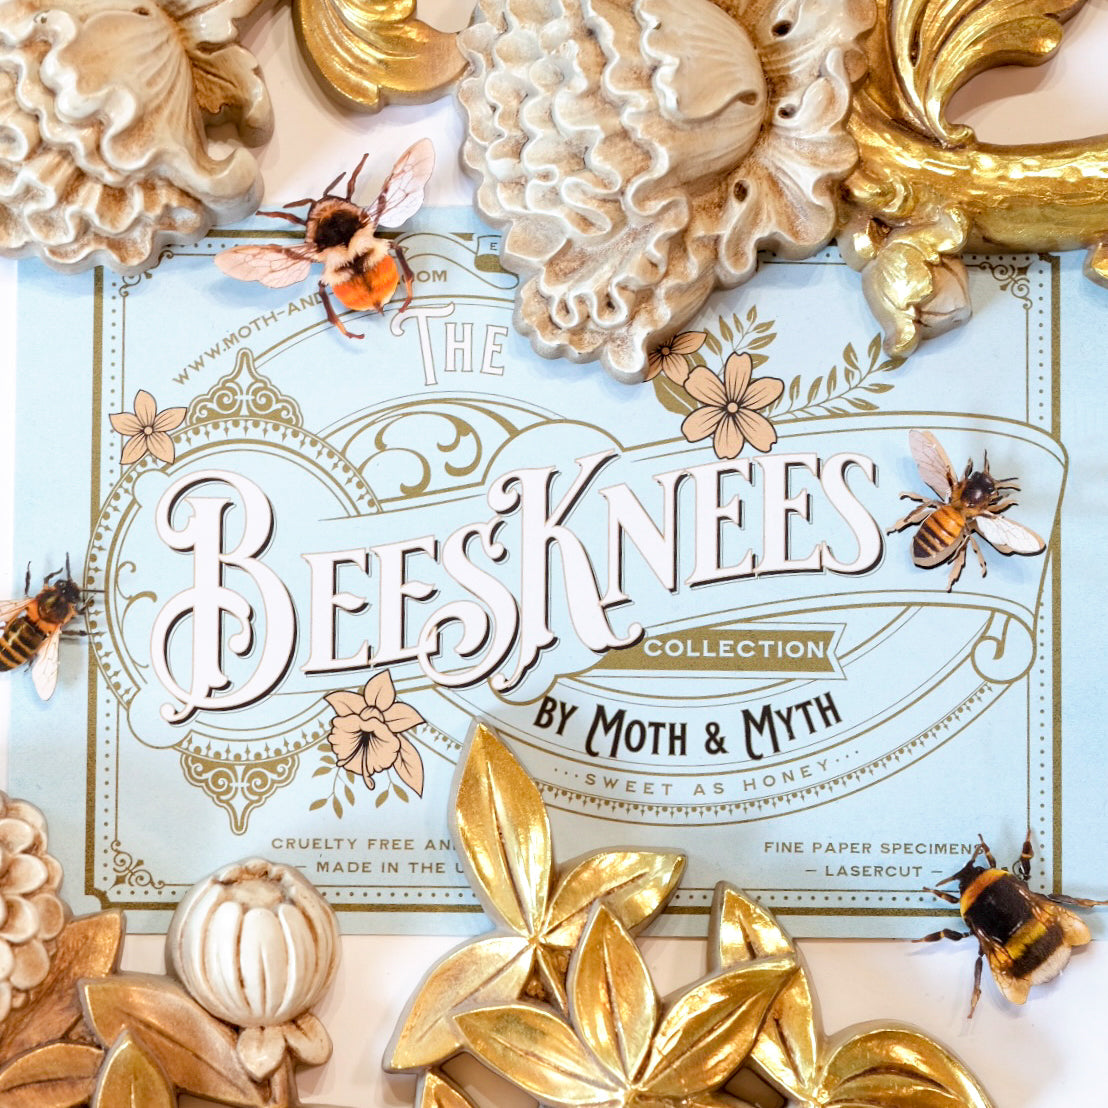 'The Bees Knees' Collection - Artist Discount